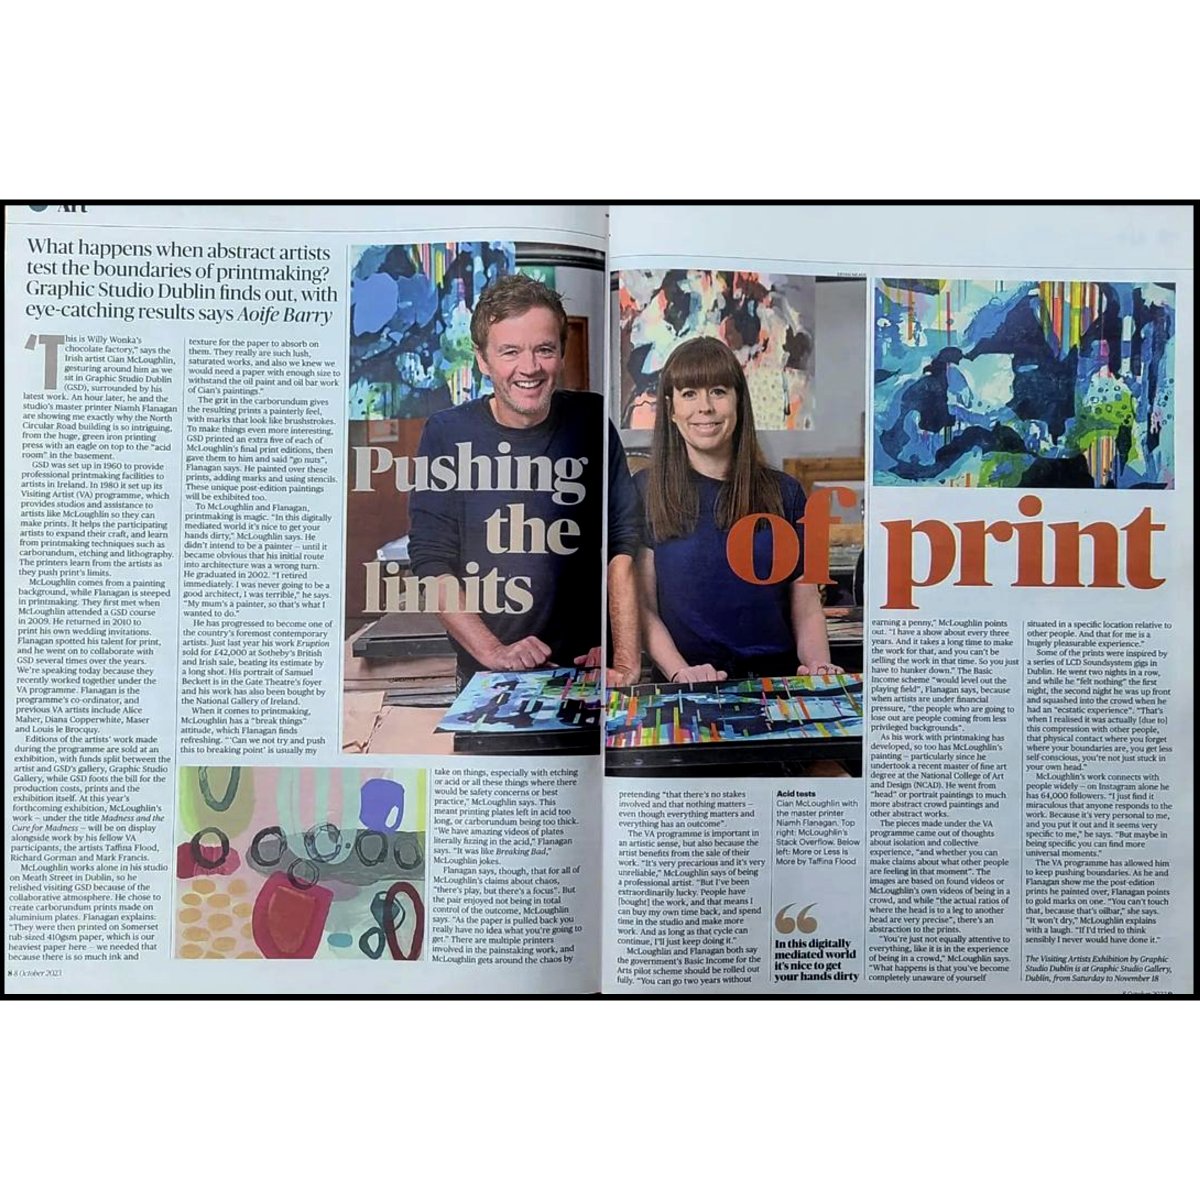 New print release! Huge thanks to @ST__Ireland and @sweetoblivion26 for the feature previewing the upcoming VA exhibition @GraphicStudioG. The work is now installed and on view in advance of the official opening next Thursday Oct 19th. graphicstudiodublin.com/va-23-shop/